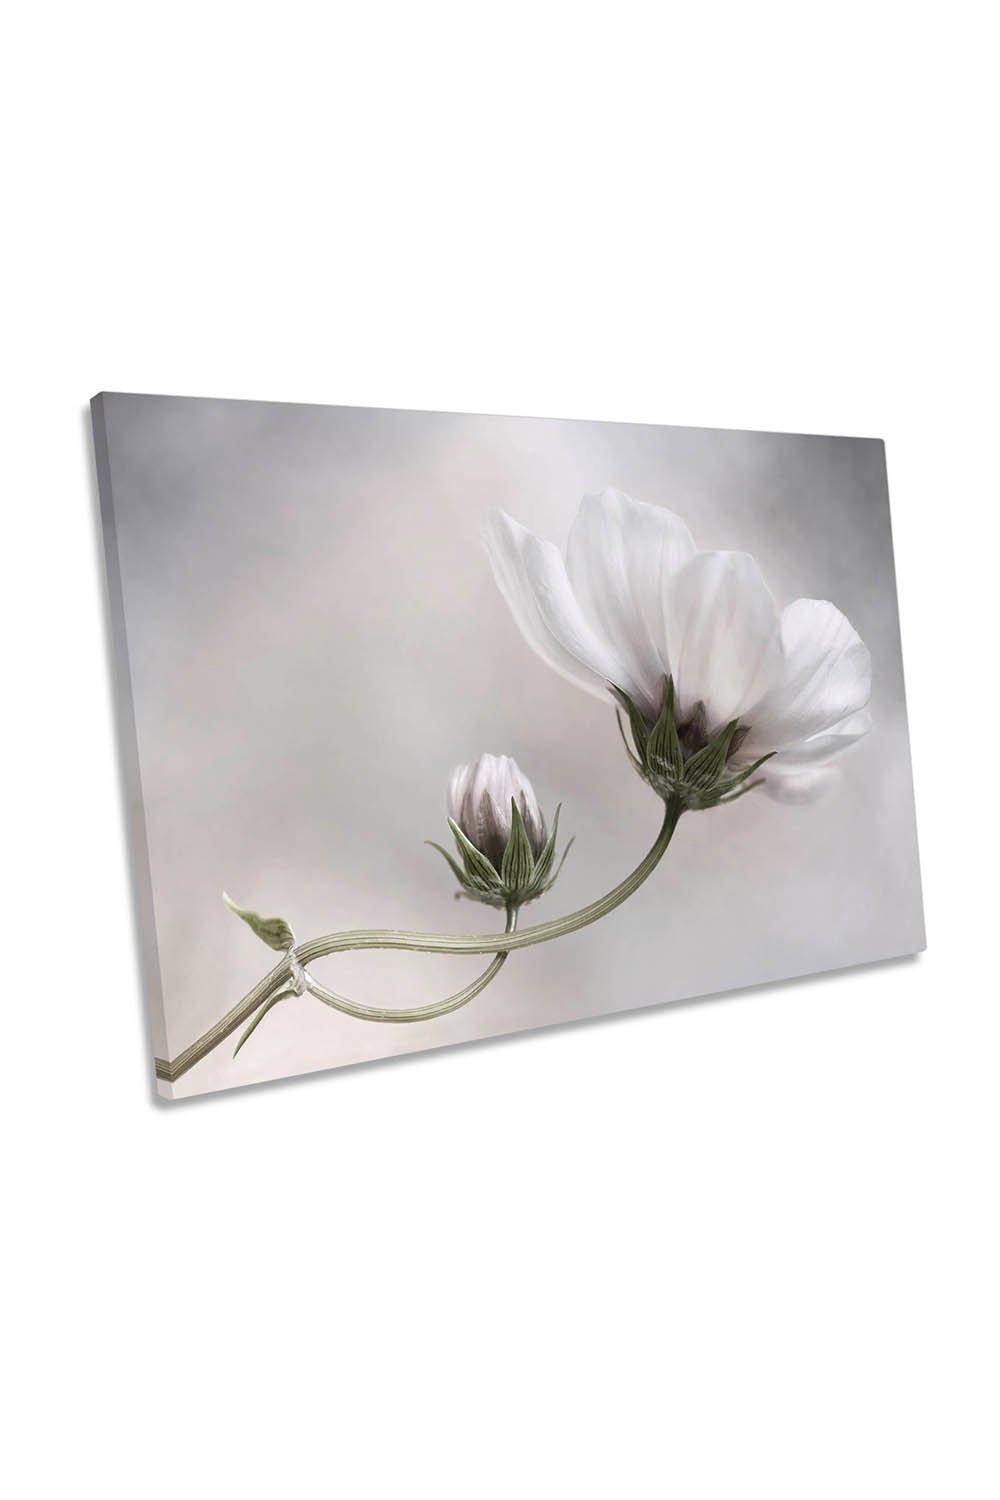 Simply Cosmos Flower Floral White Canvas Wall Art Picture Print